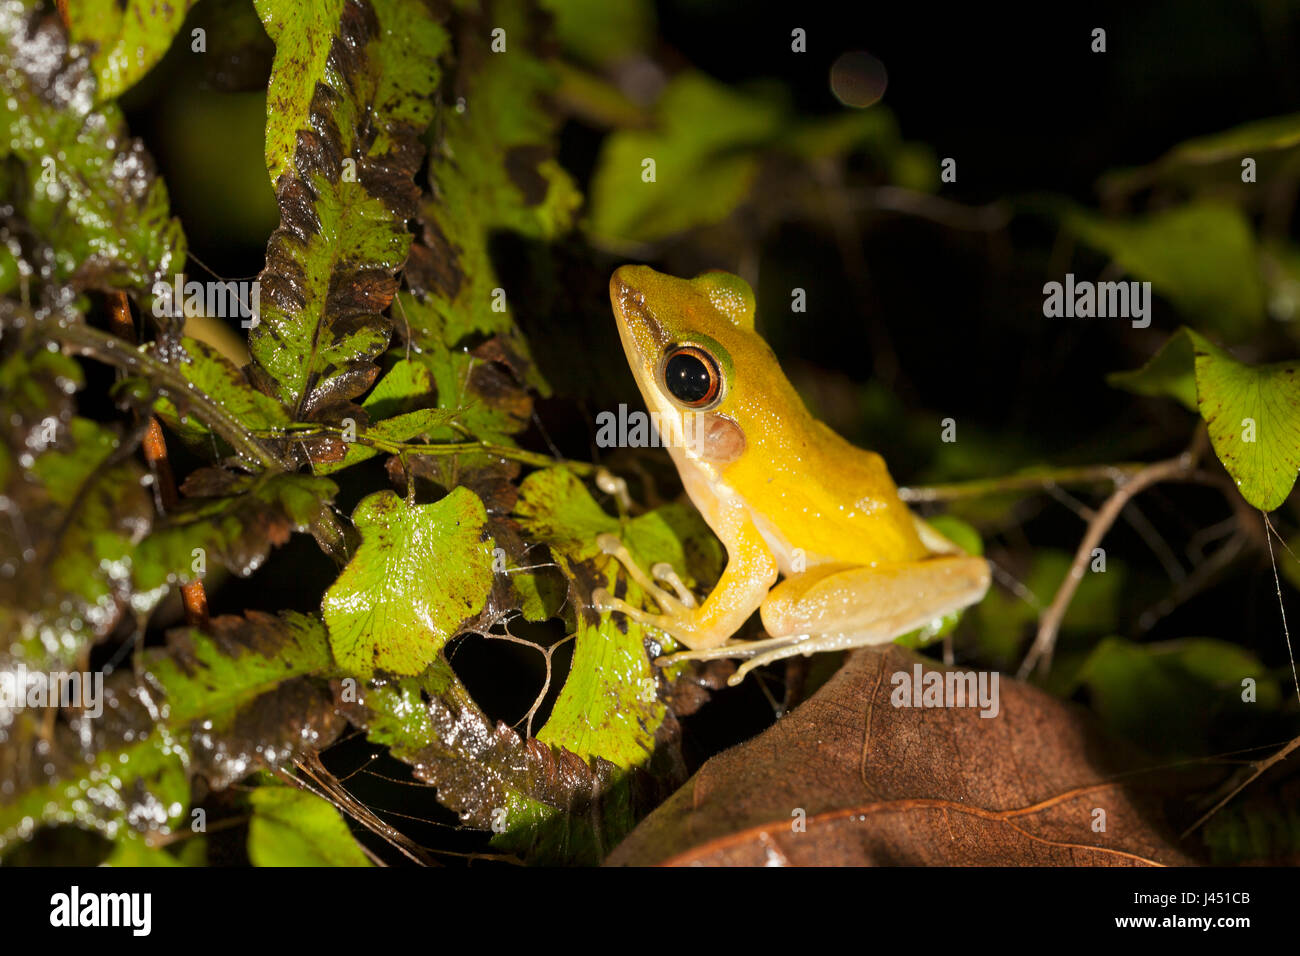 photo of a copper cheeked frog on a leaf Stock Photo